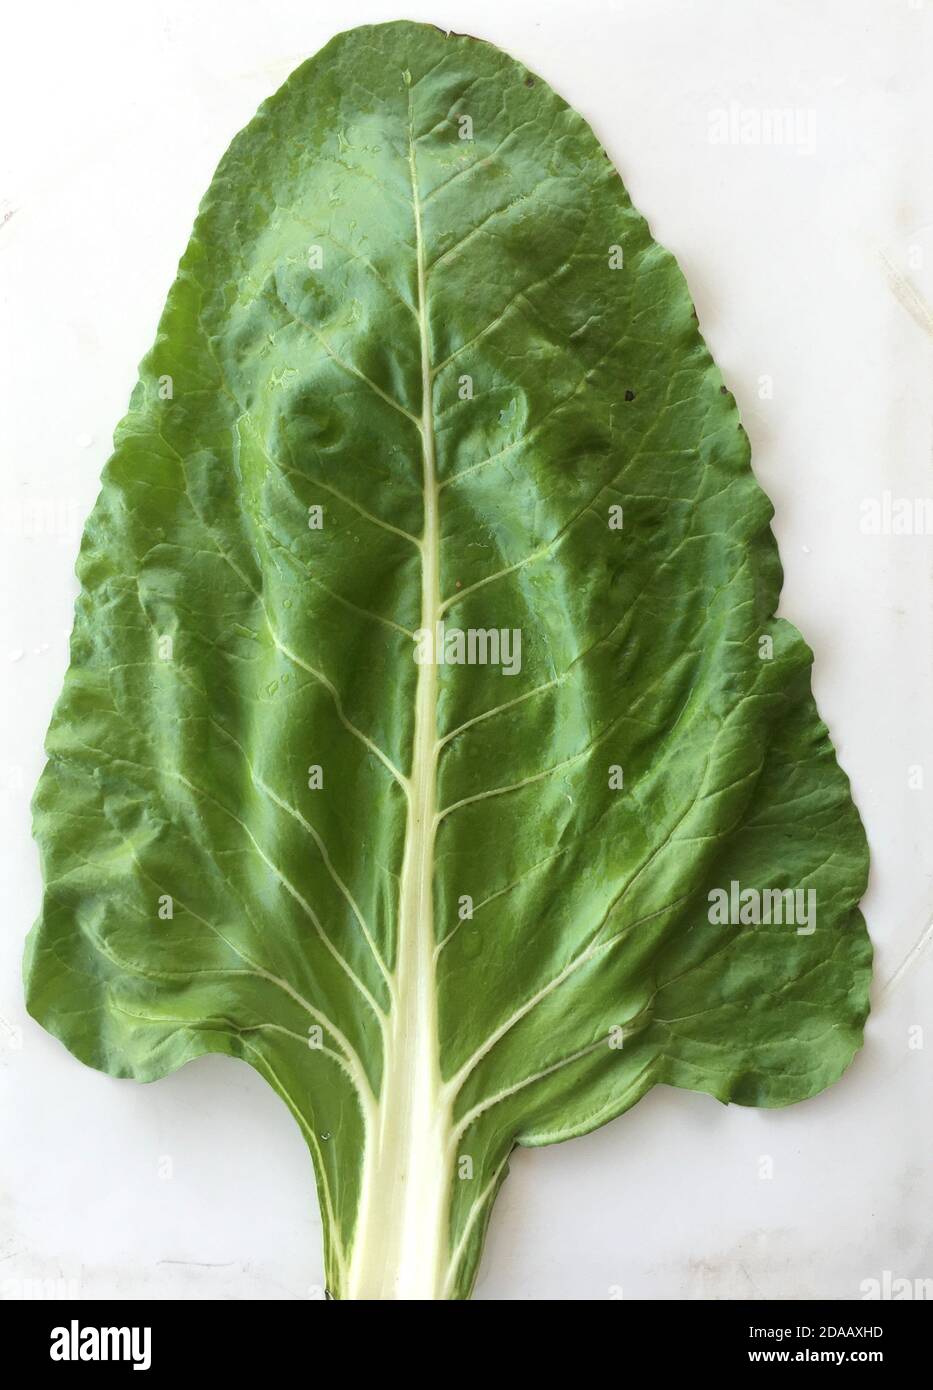 Adaxial sided chard leaf on white background Stock Photo